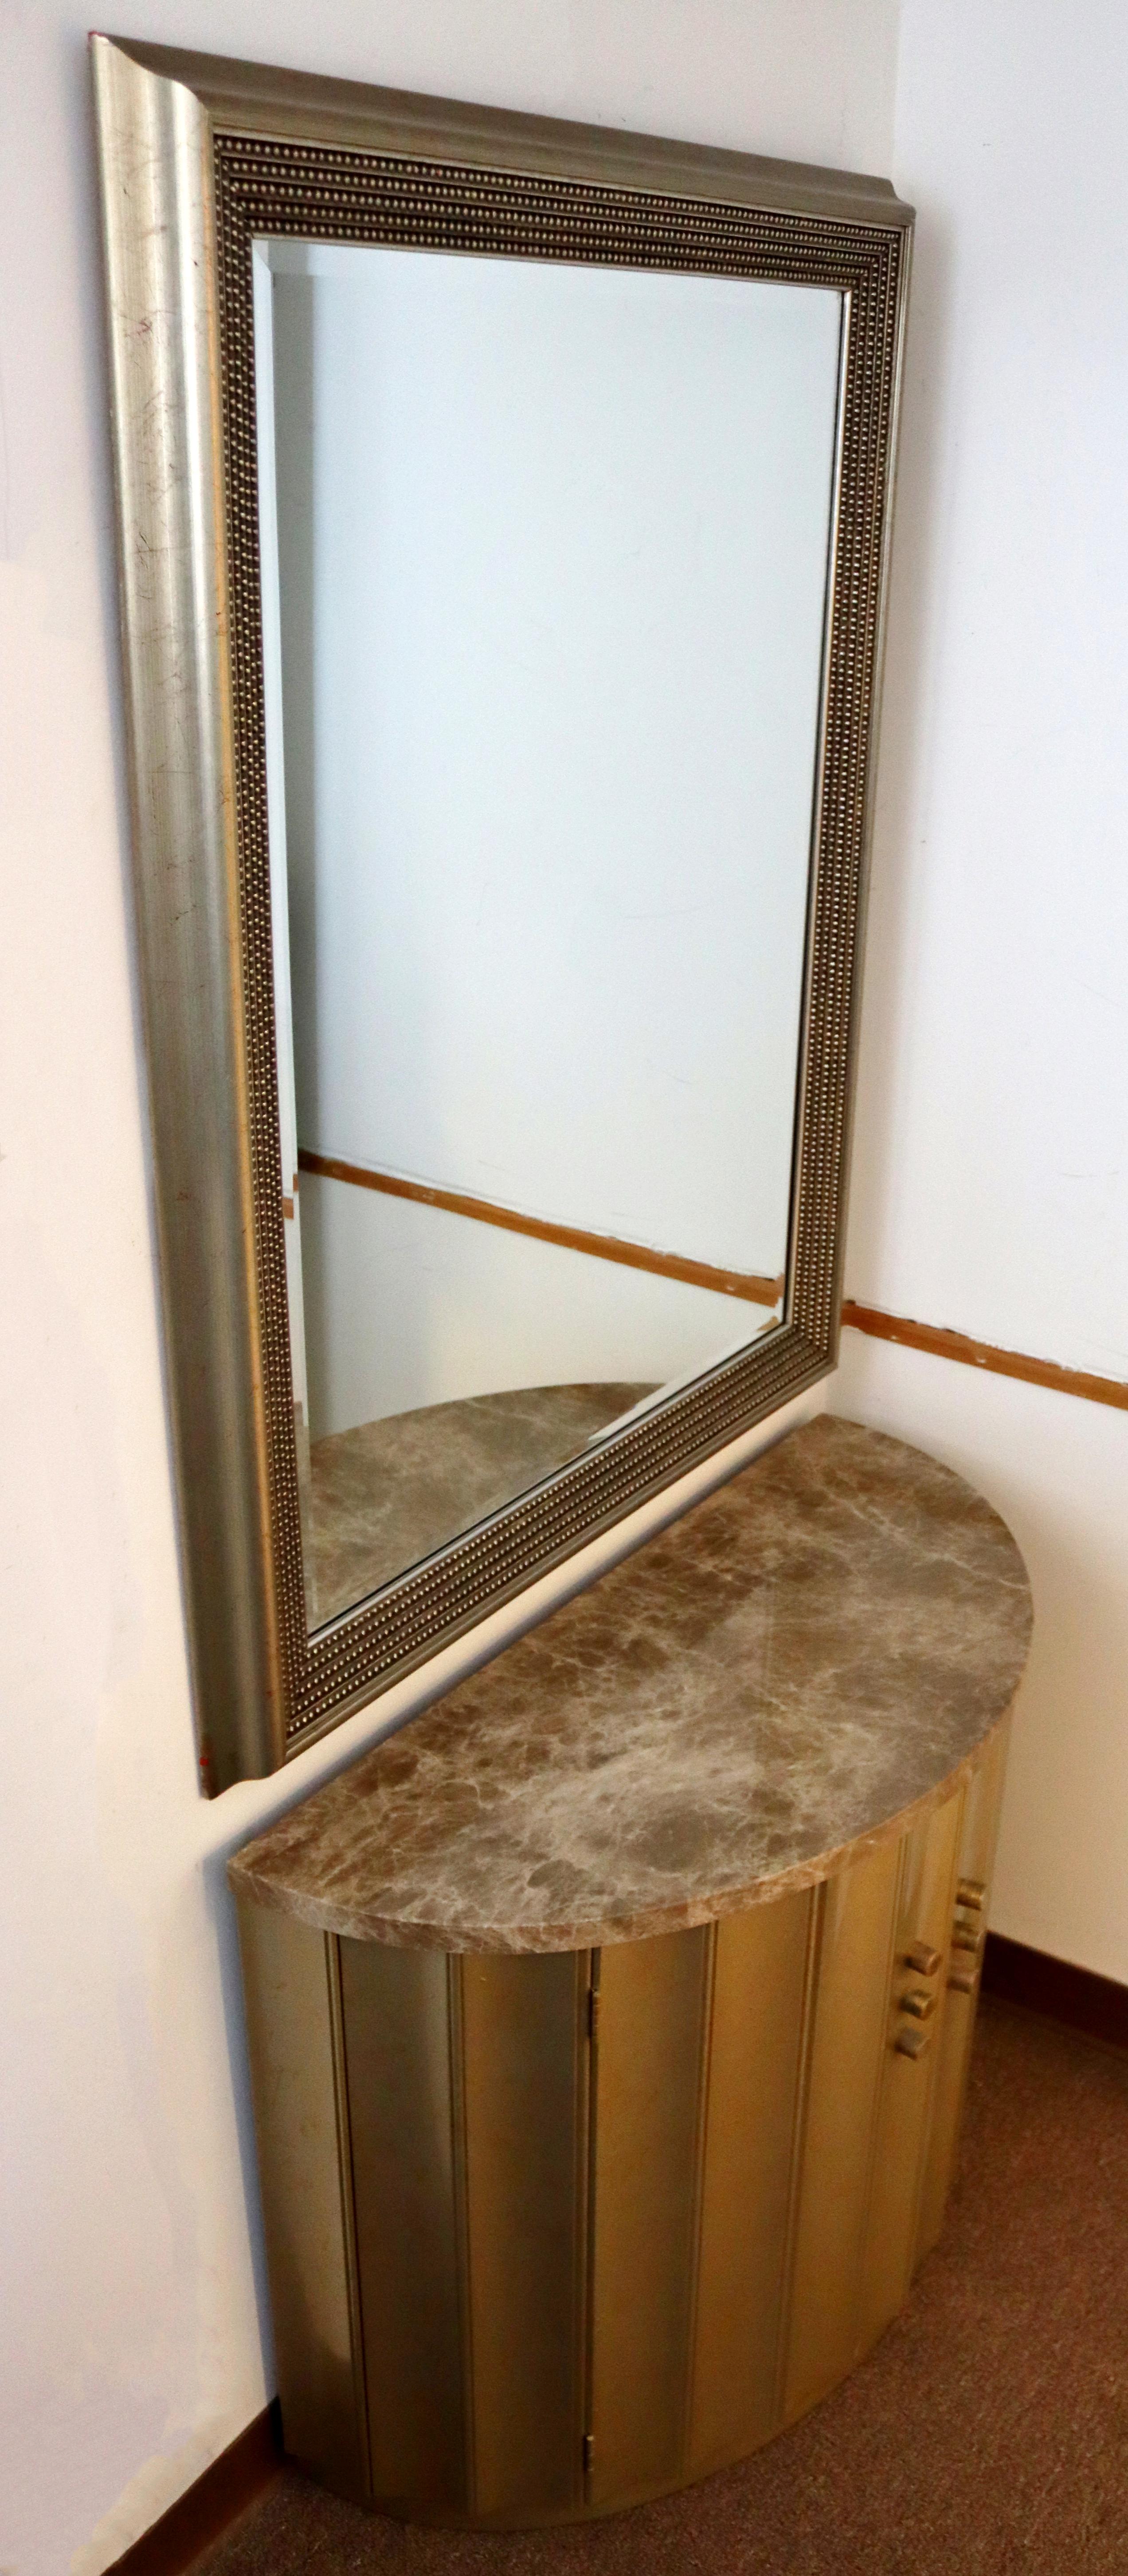 Late 20th Century Contemporary Modern Gold Gilt Wall Mirror Demilume Console Foyer Table Cabinet